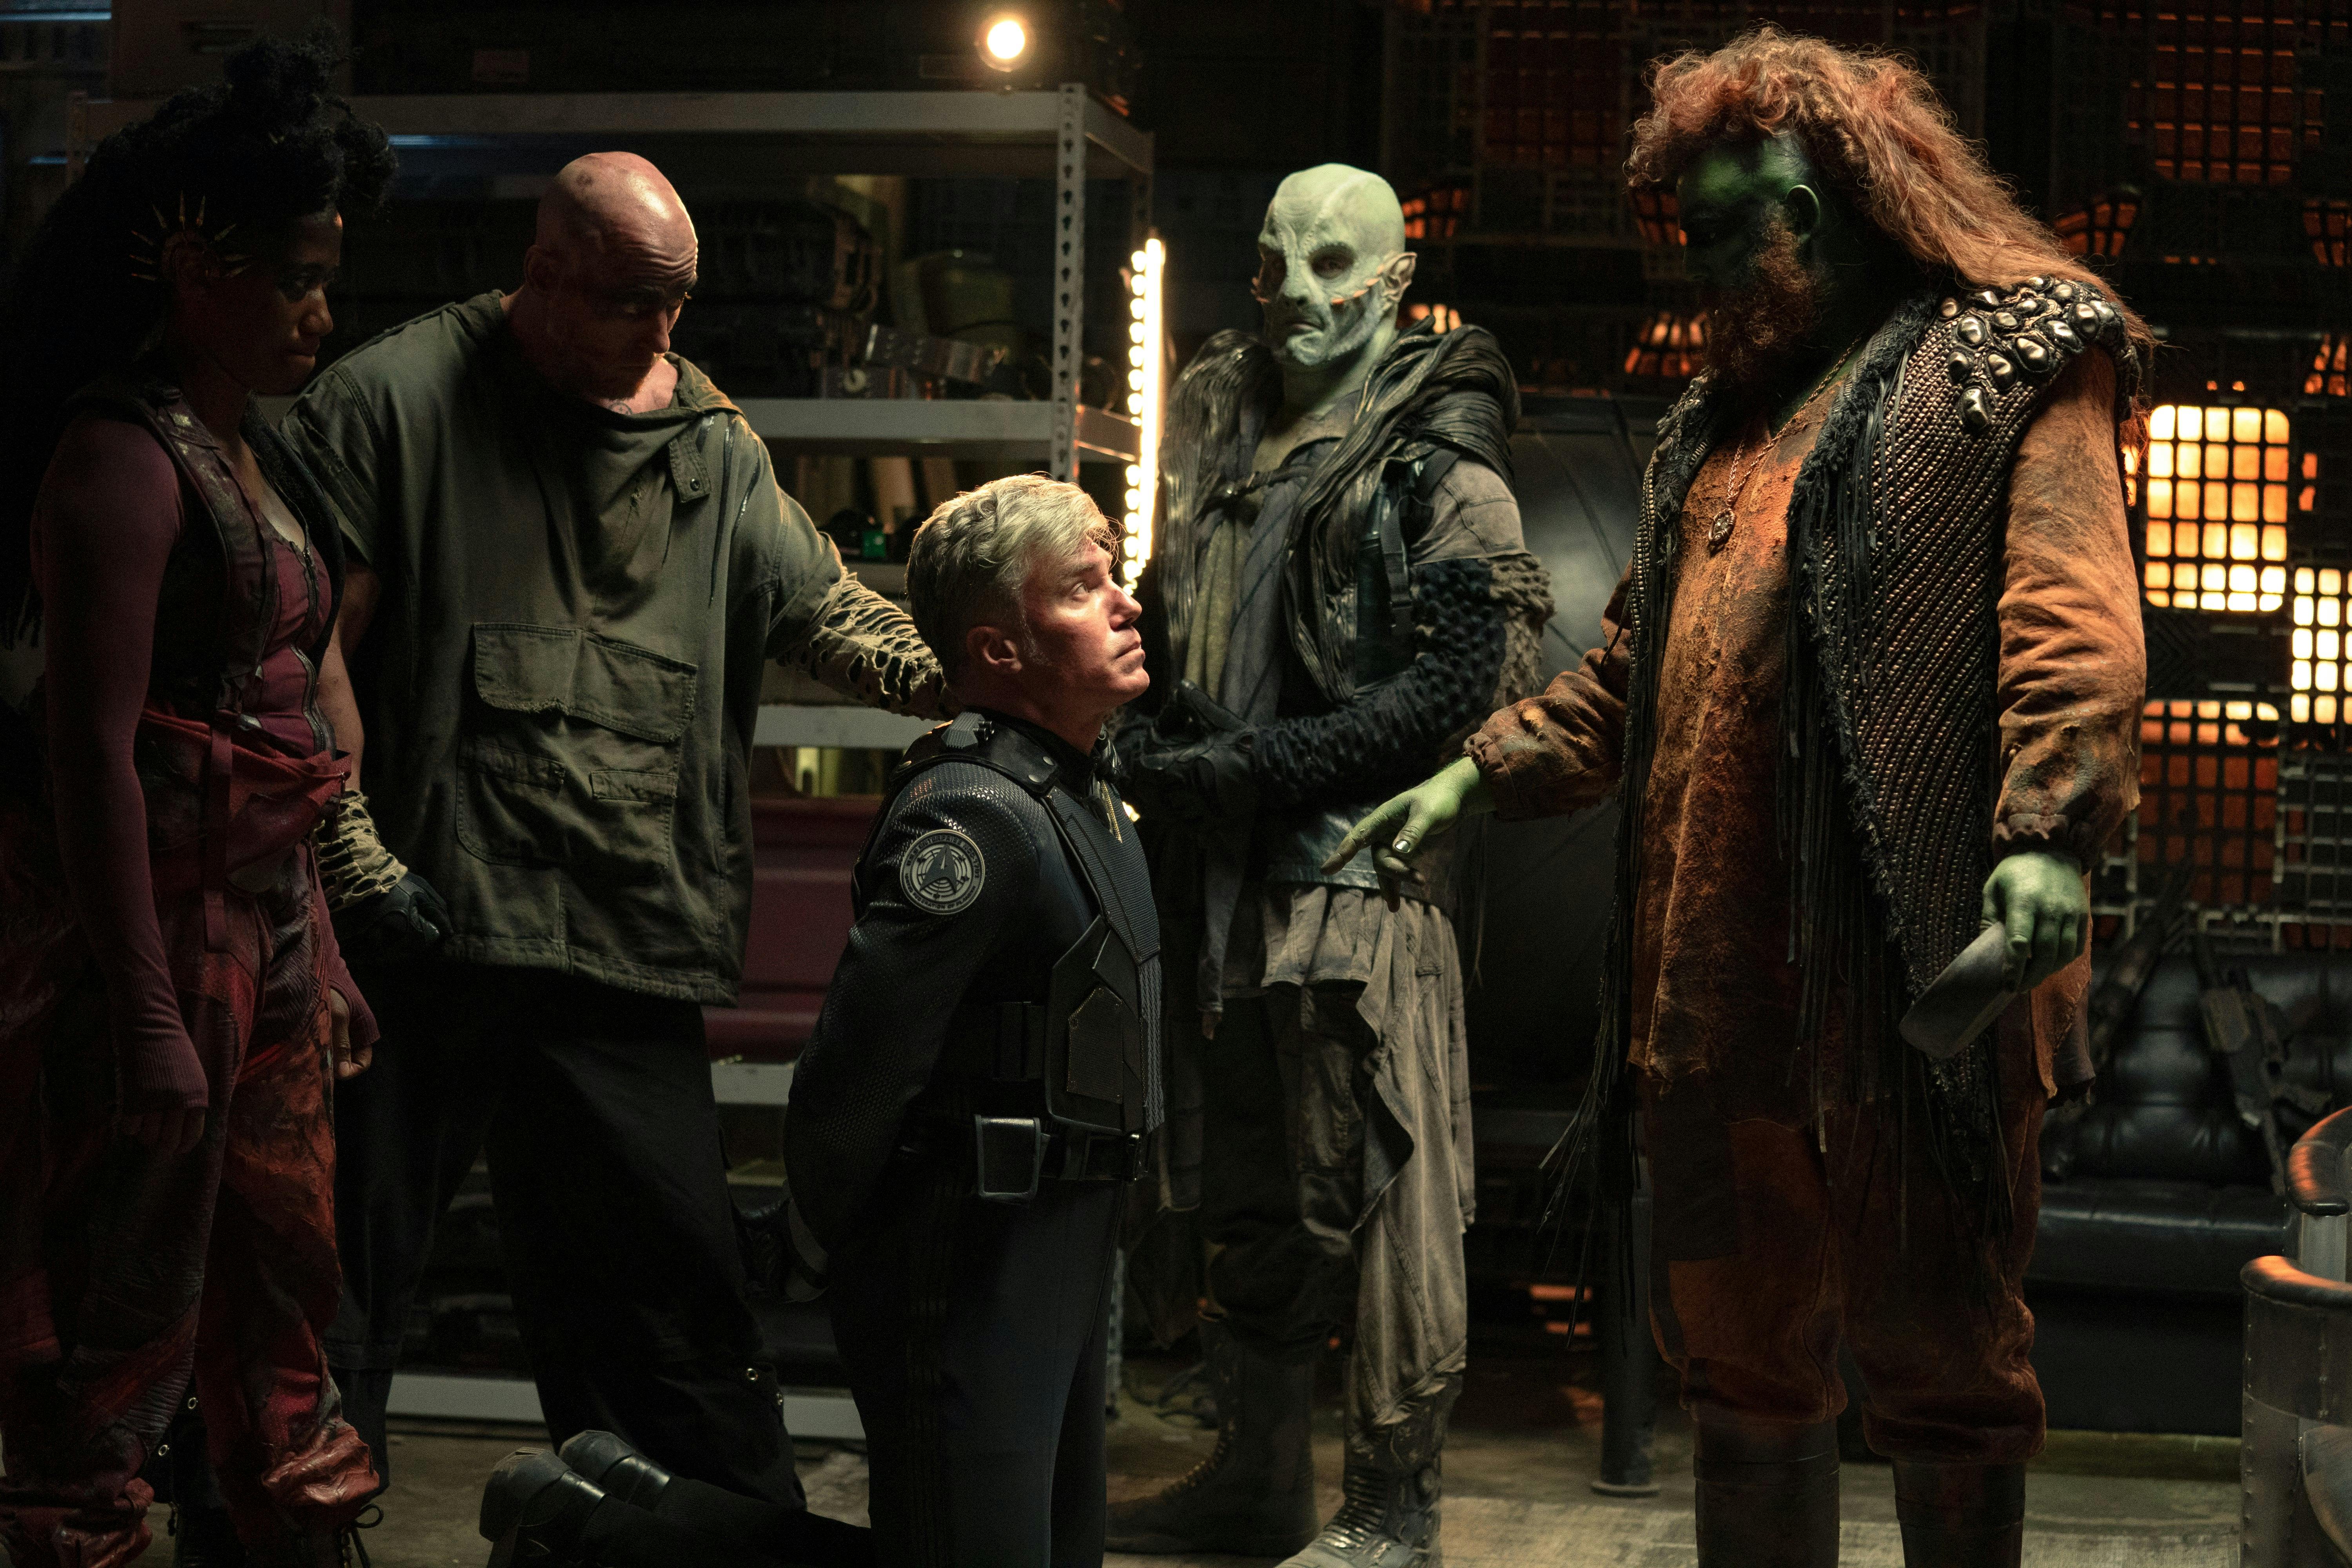 Captain Pike (Anson Mount) is held prisoner by a group of aliens.